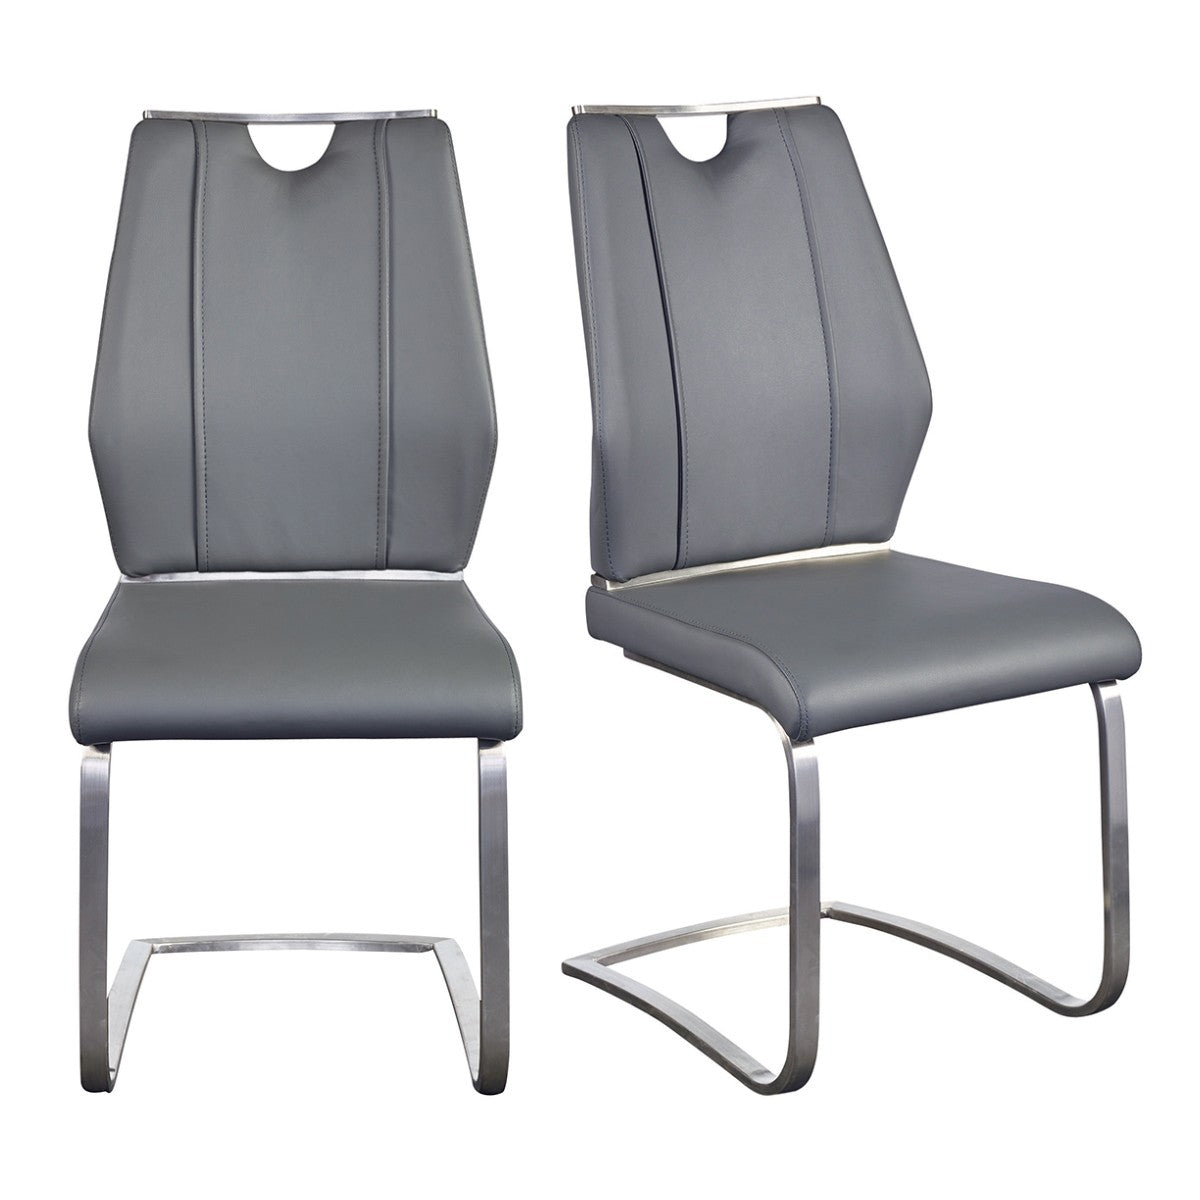 Set of Two Light Gray Faux Leather Cantilever Chairs